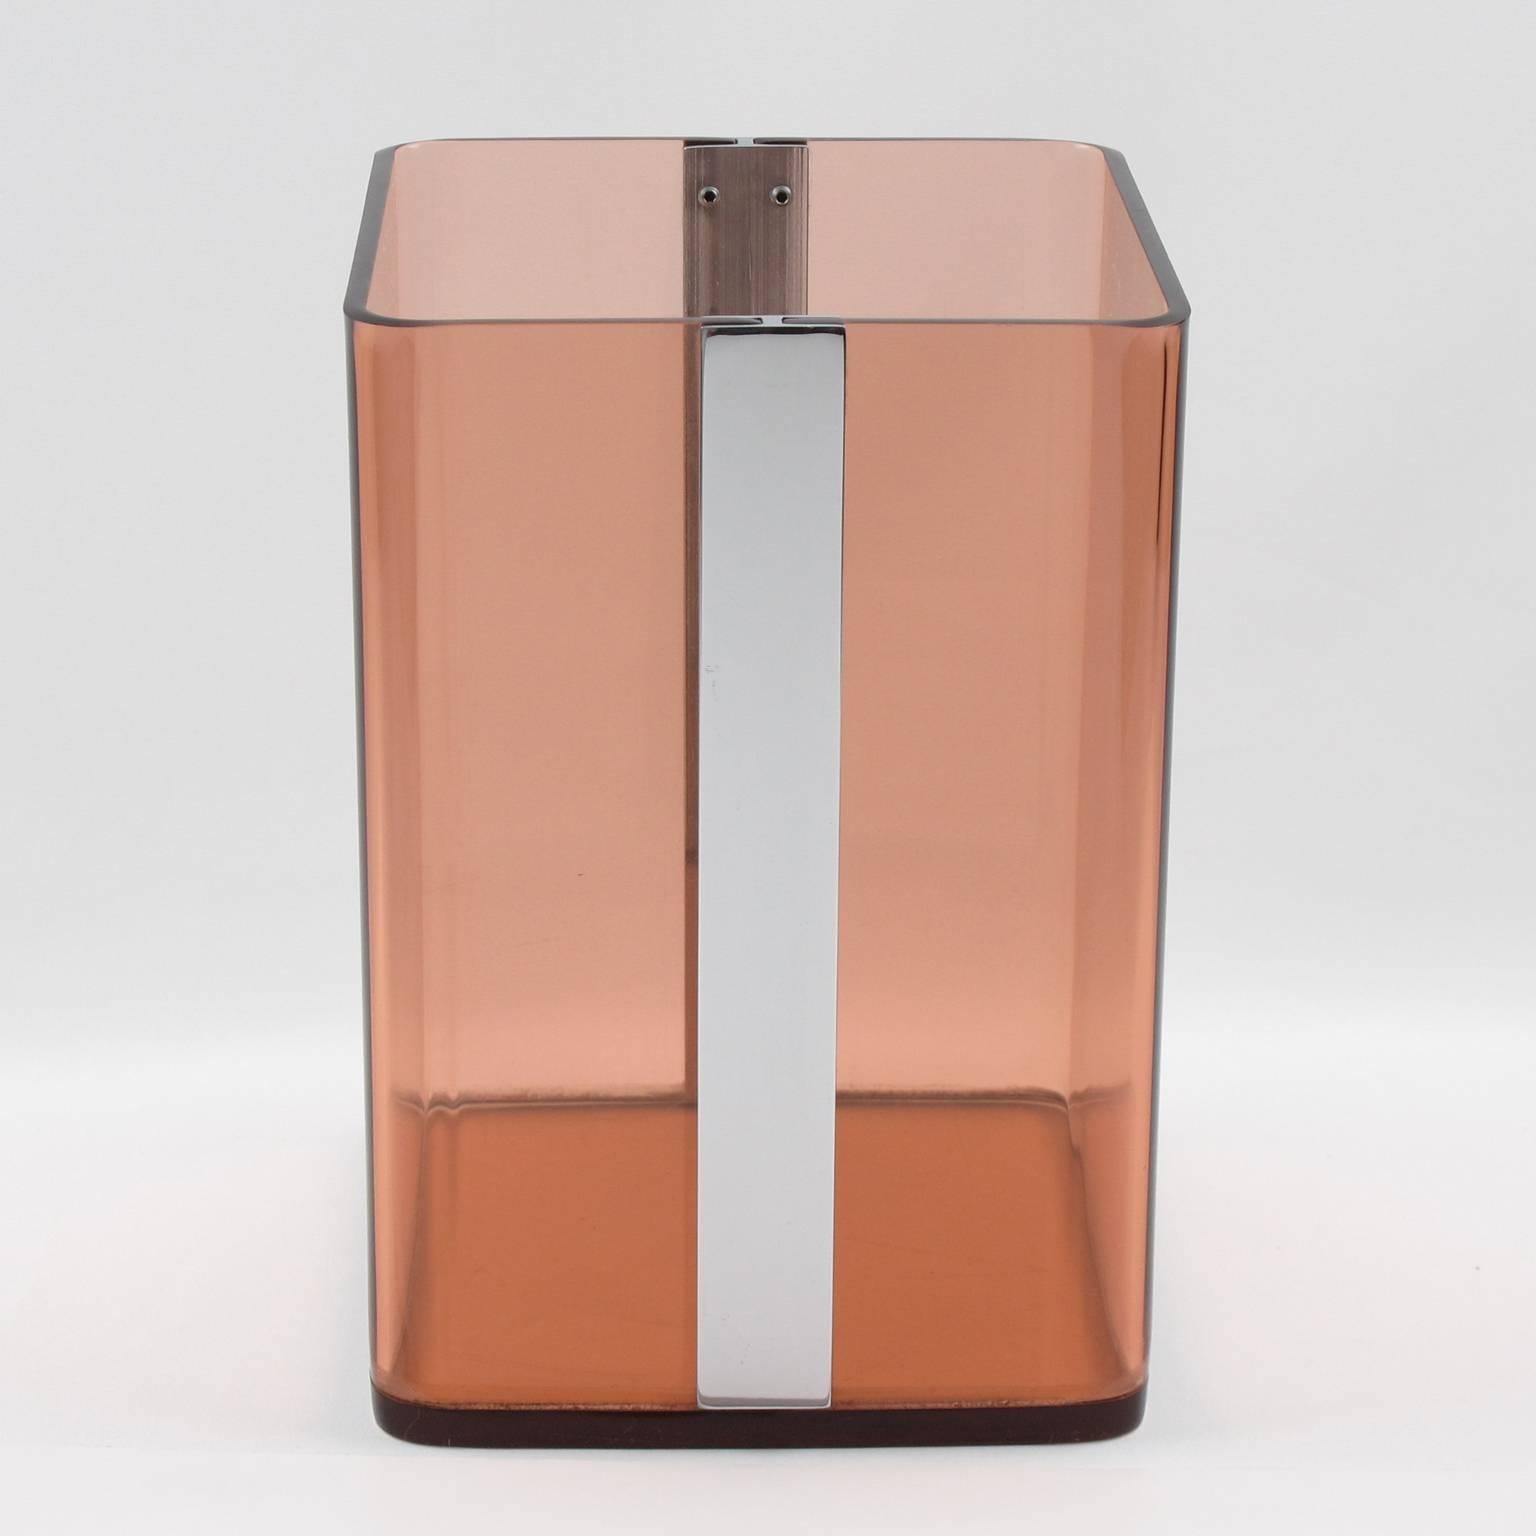 Vintage Lucite paper waste basket designed for Roche Bobois, France in 1970s. Geometric tall shape with chrome accent and transparent smoked Lucite. Great accessory for any modern interior, office or bathroom. Excellent vintage condition.